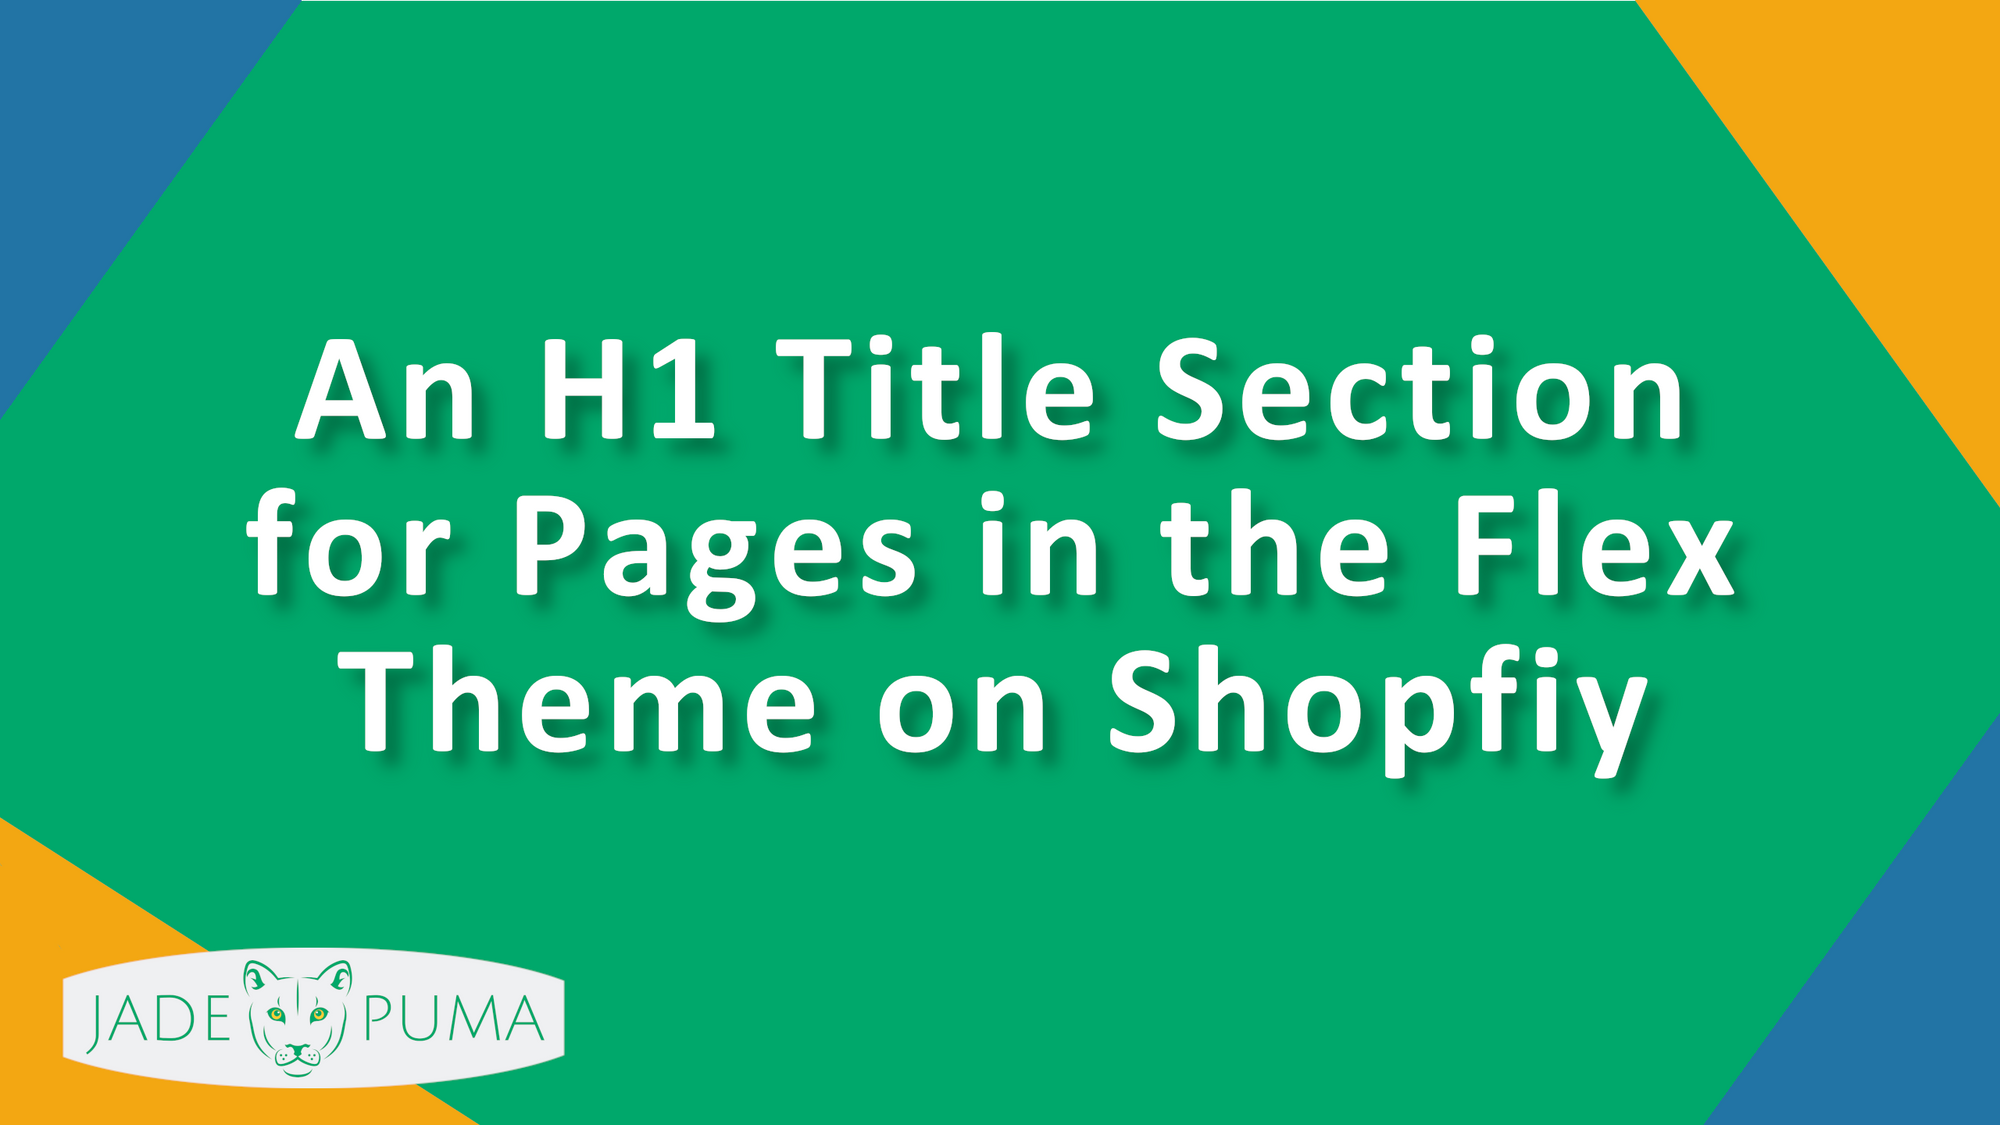 An H1 Title Section for Pages in the Flex Theme on Shopify